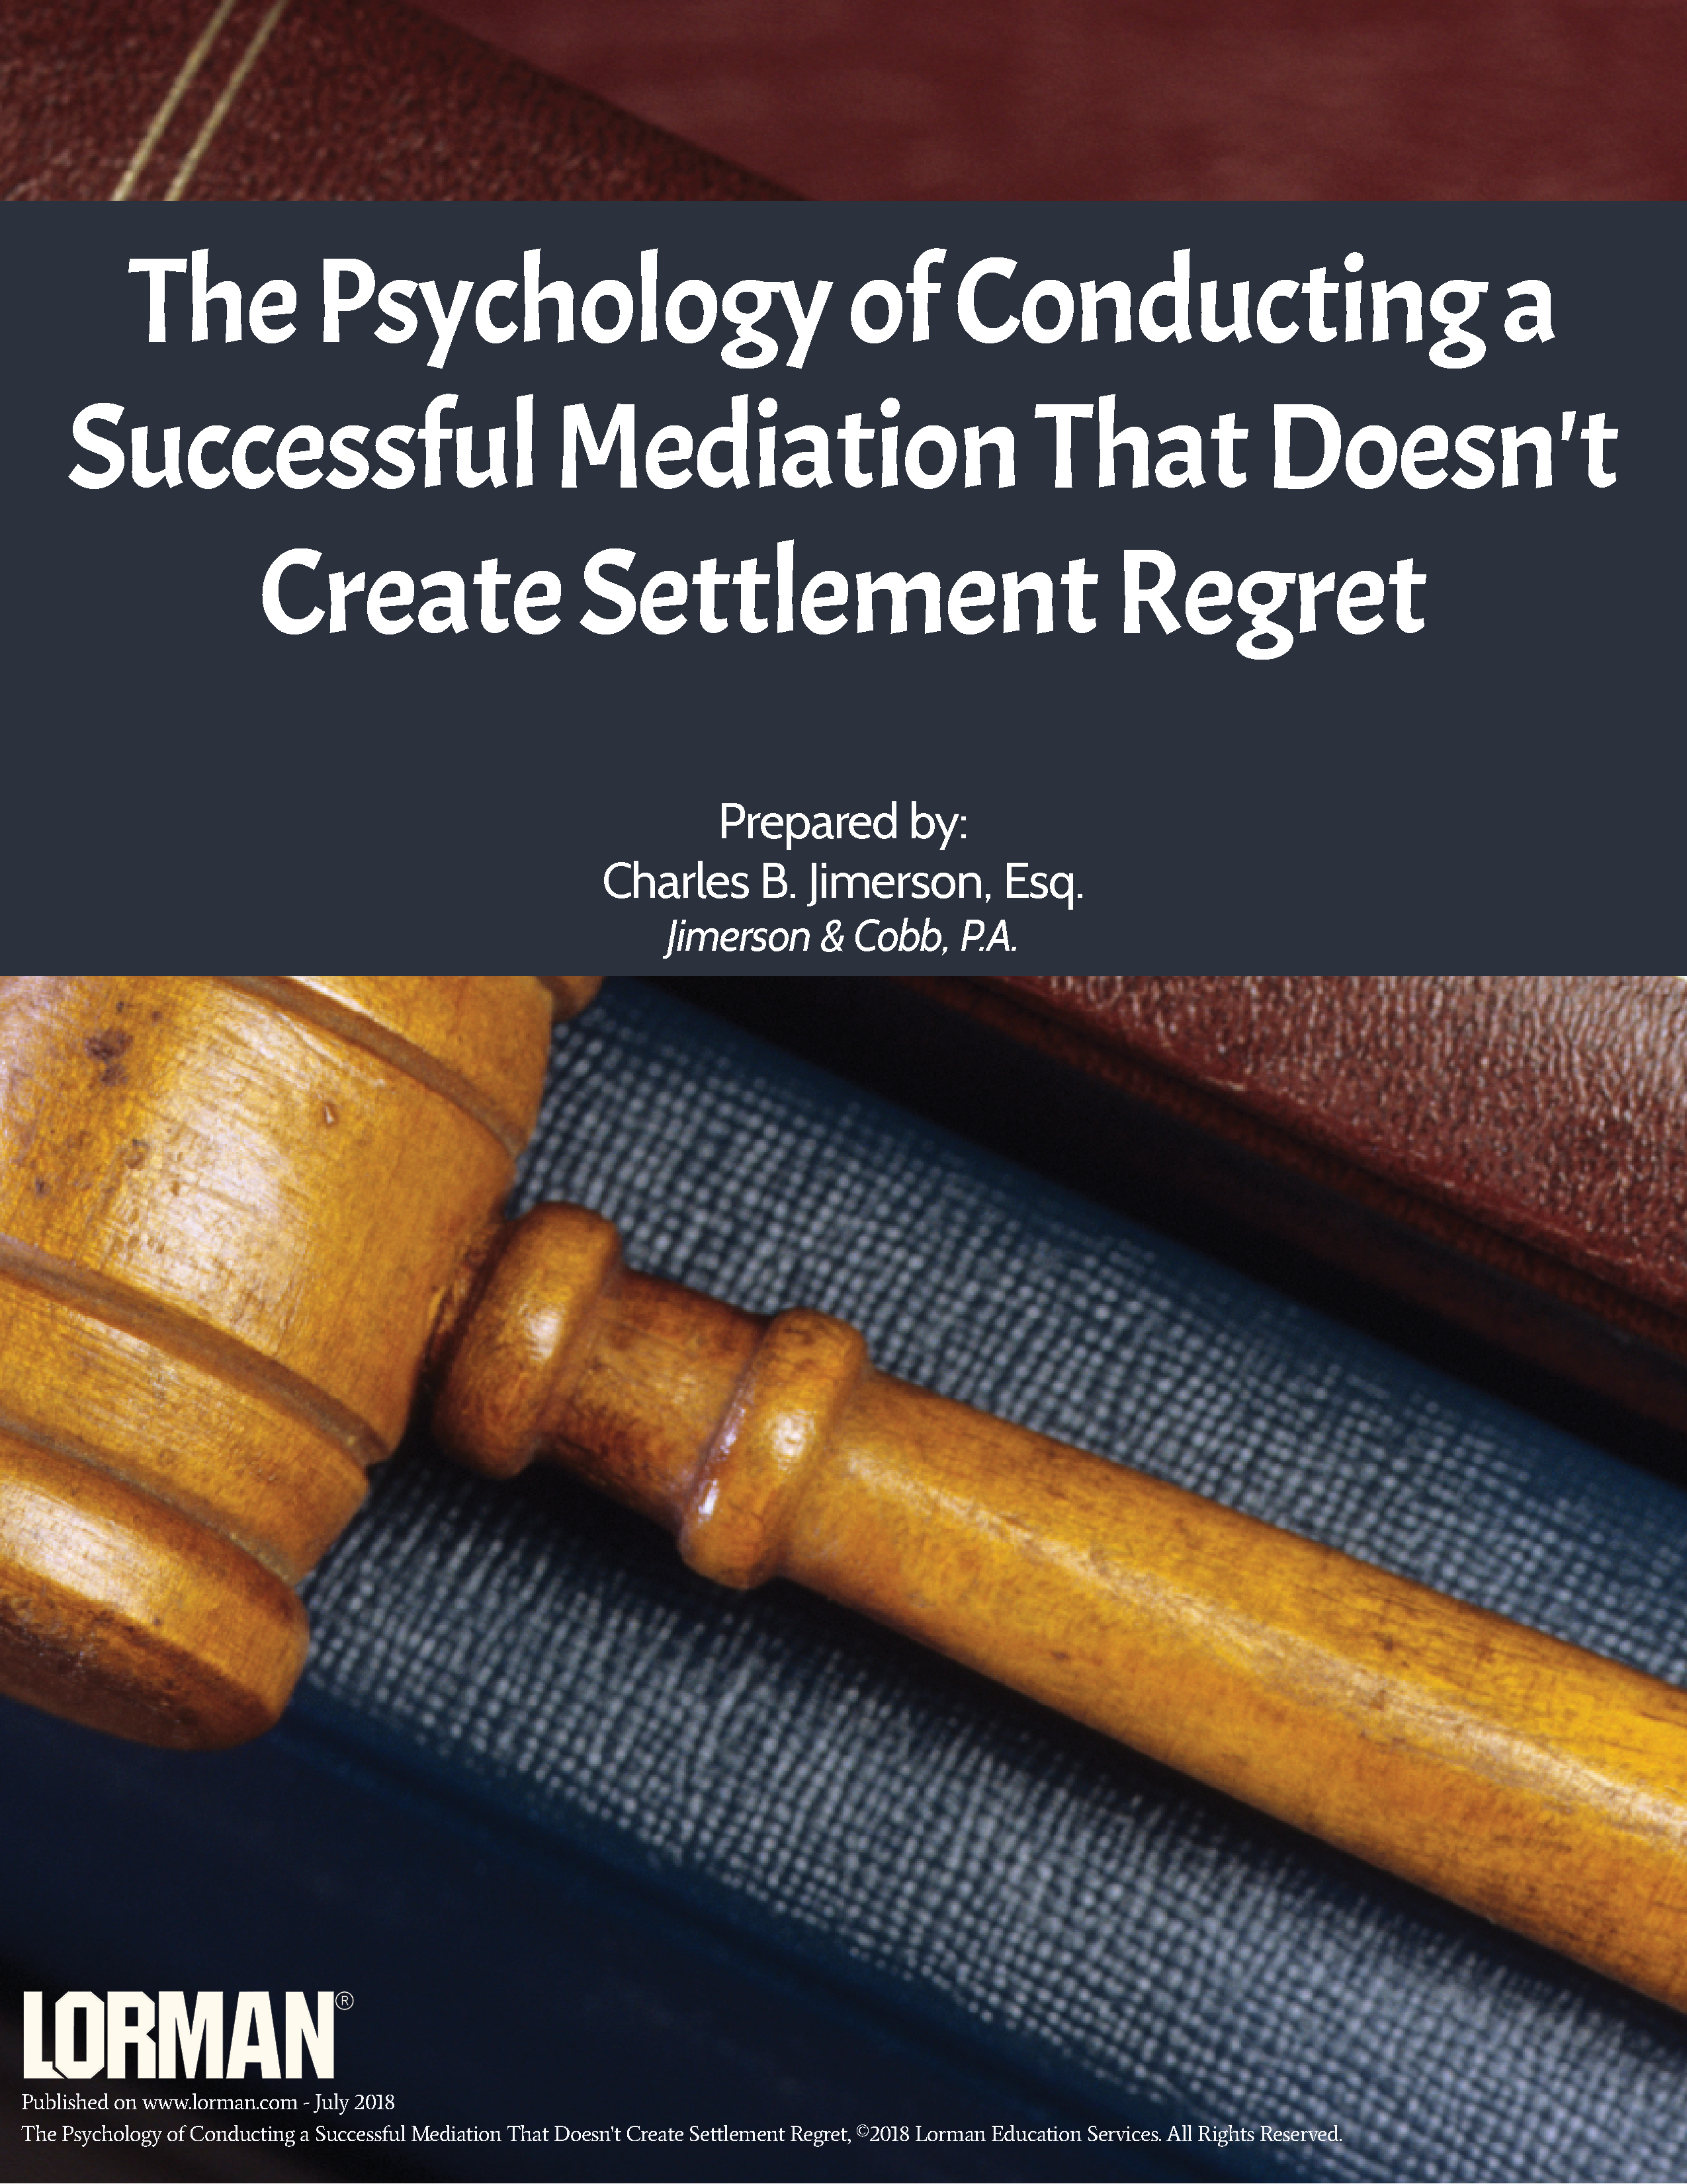 The Psychology of Conducting a Successful Mediation That Doesn't Create Settlement Regret